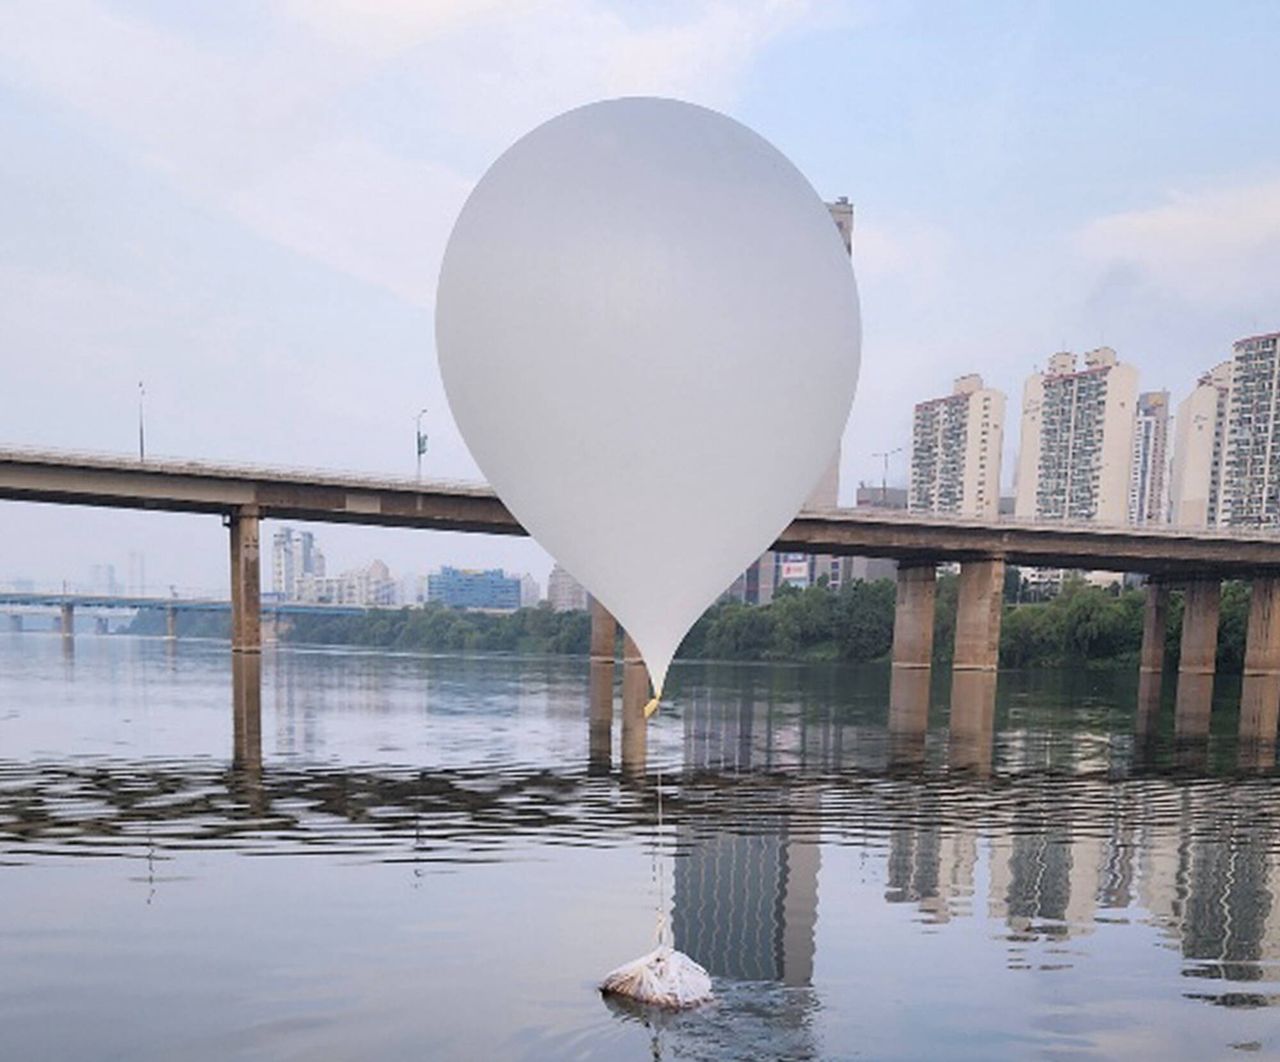 North Korea once again sent balloons with trash to South Korea.